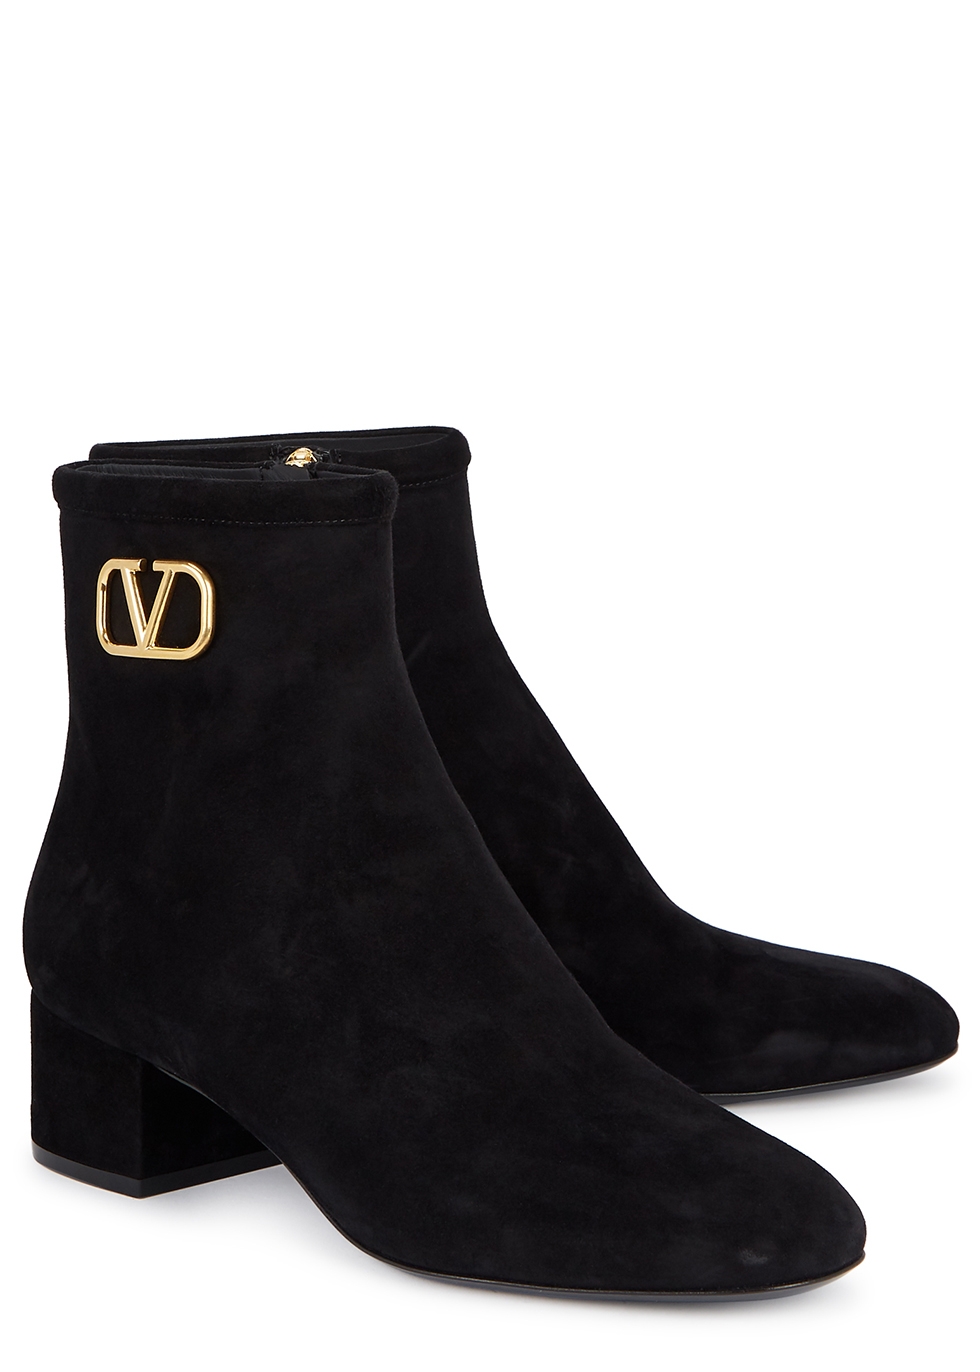 black suede ankle boots